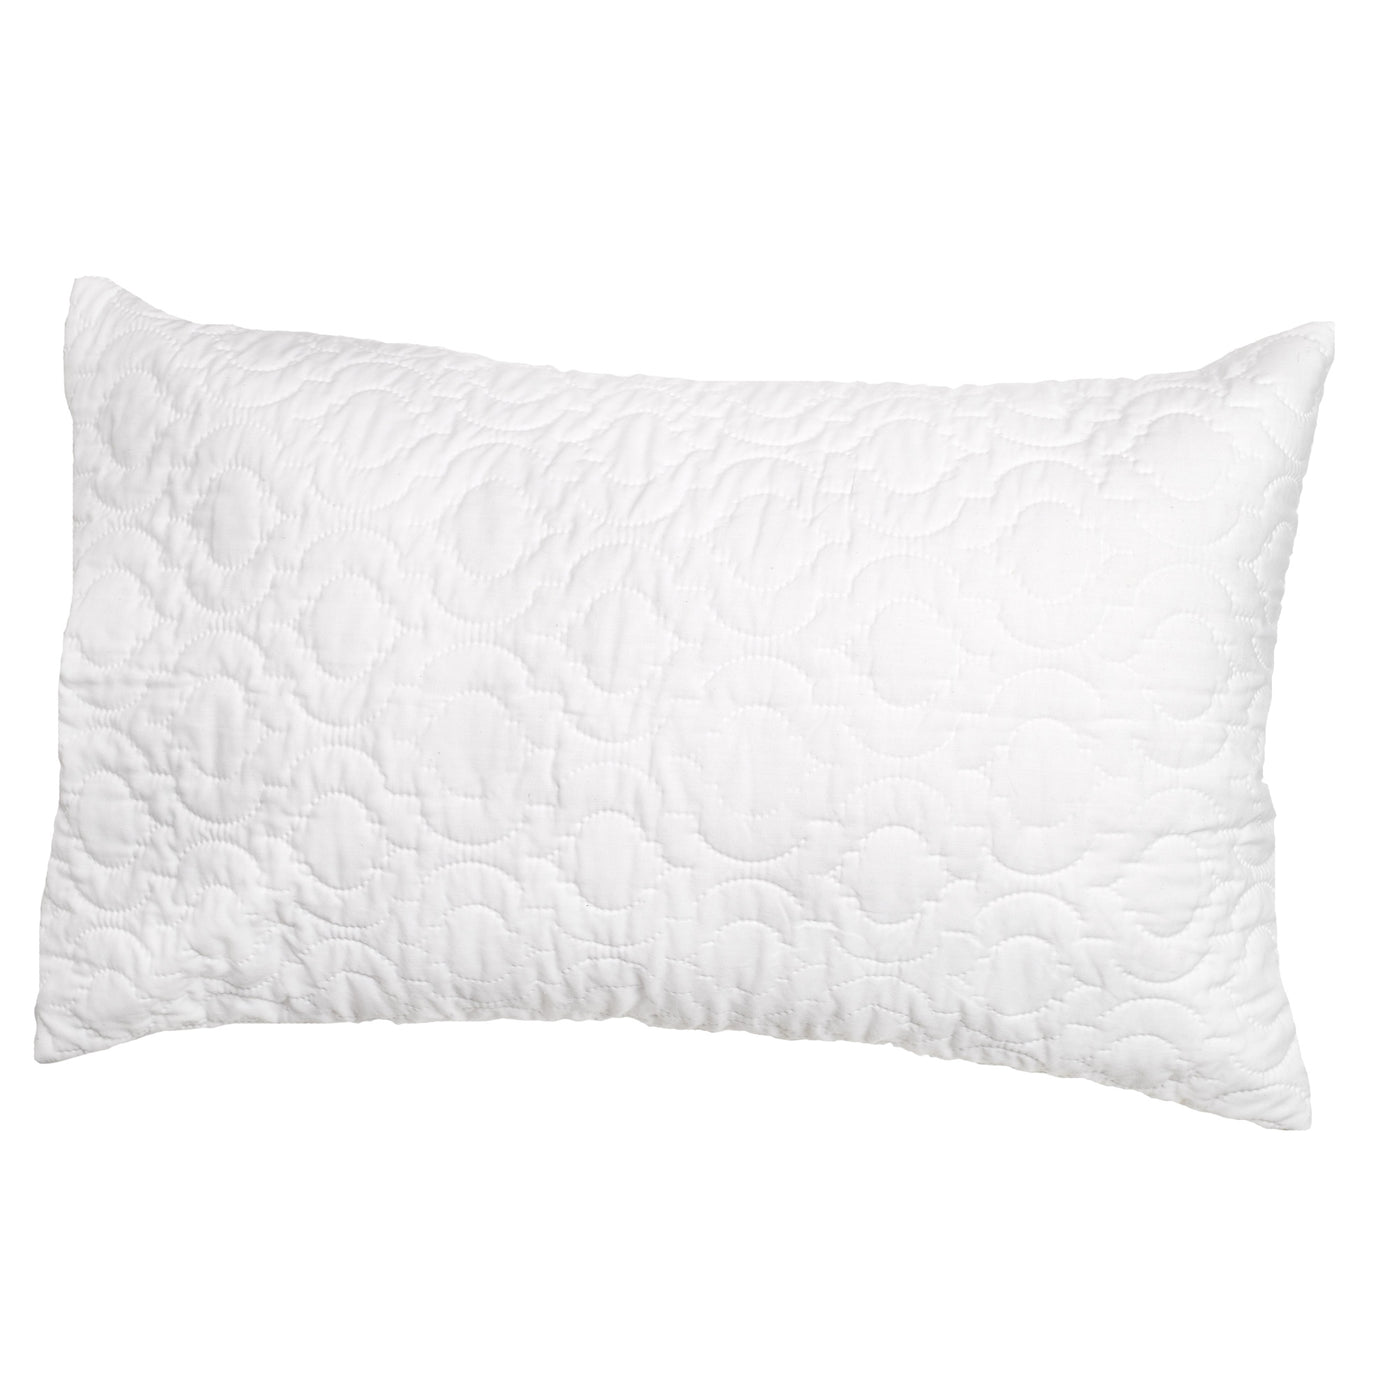 Waterproof Pillow Protector - Quilted